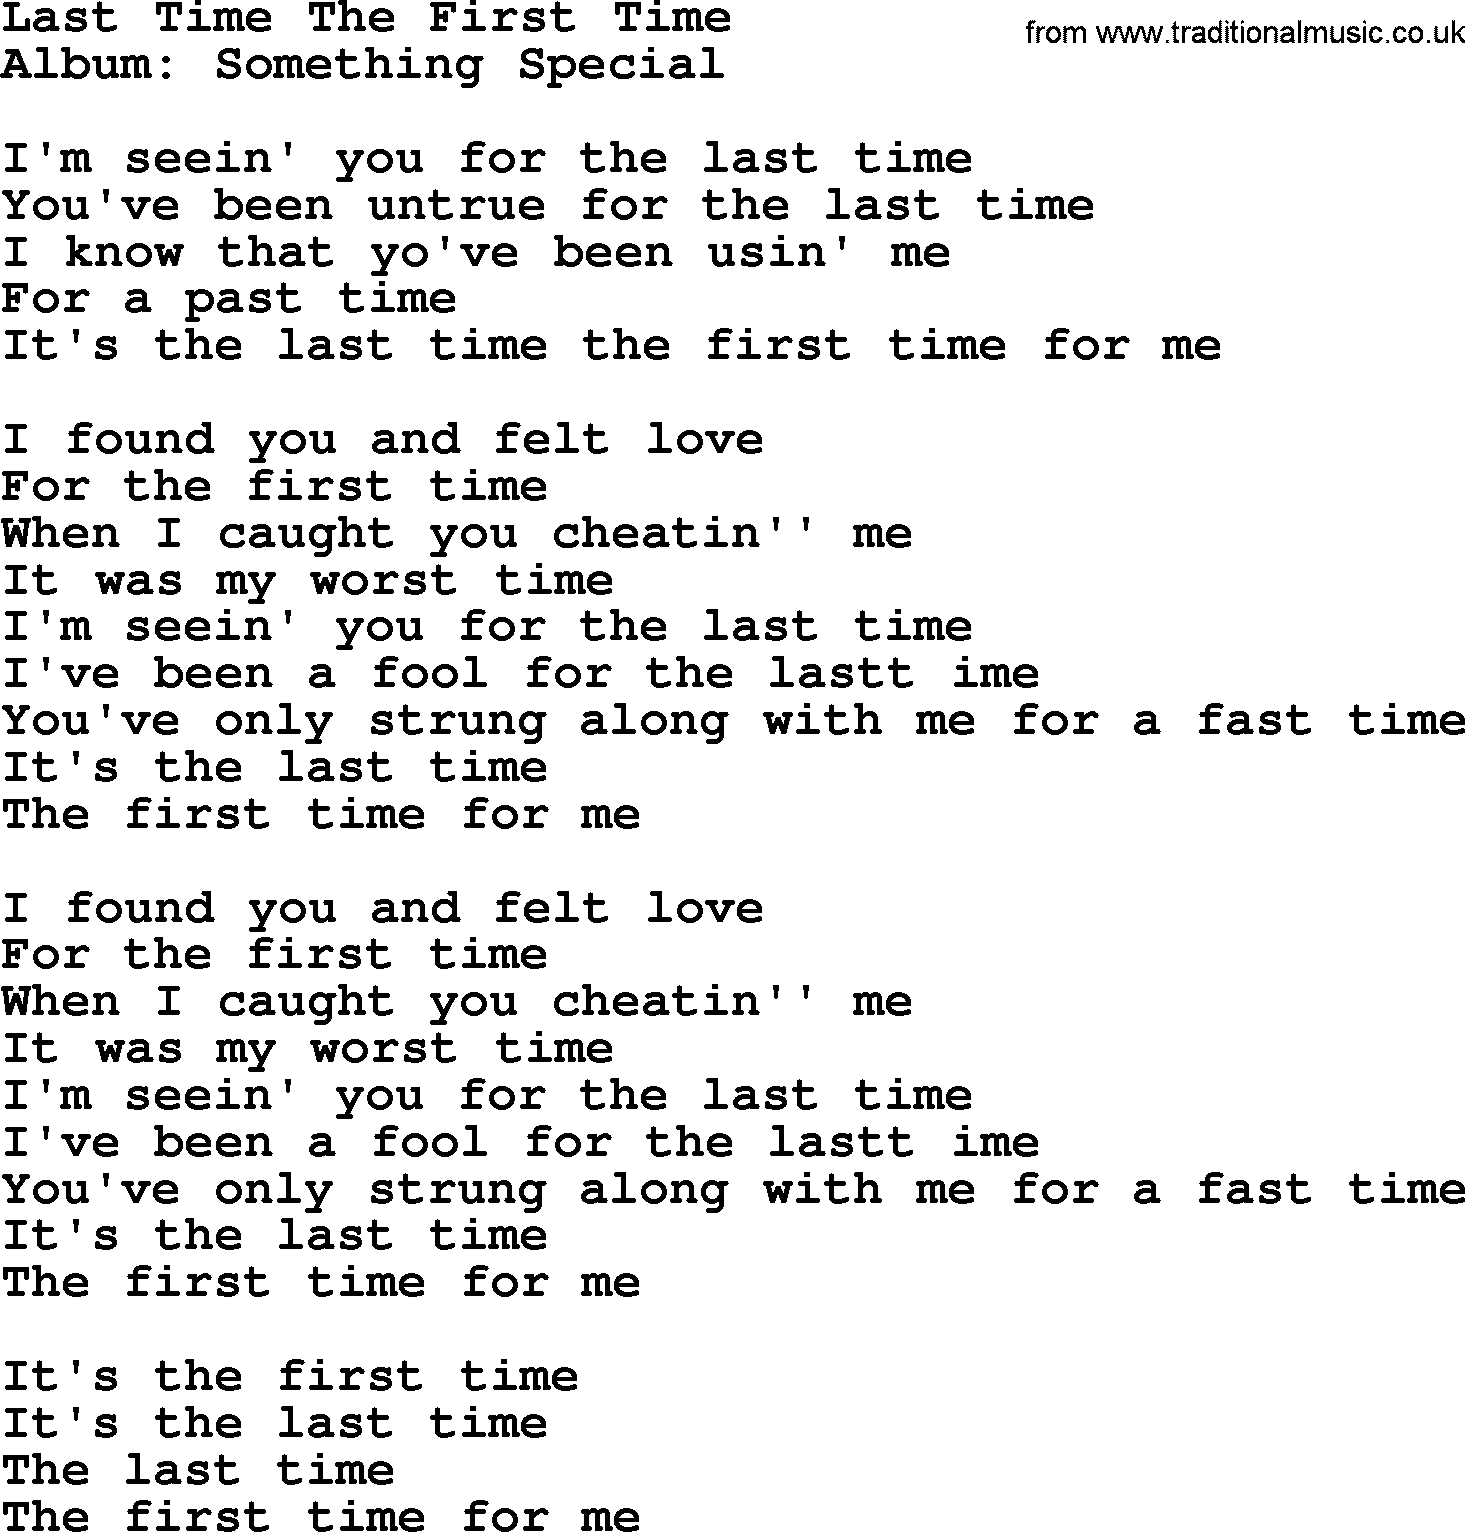 George Strait song: Last Time The First Time, lyrics